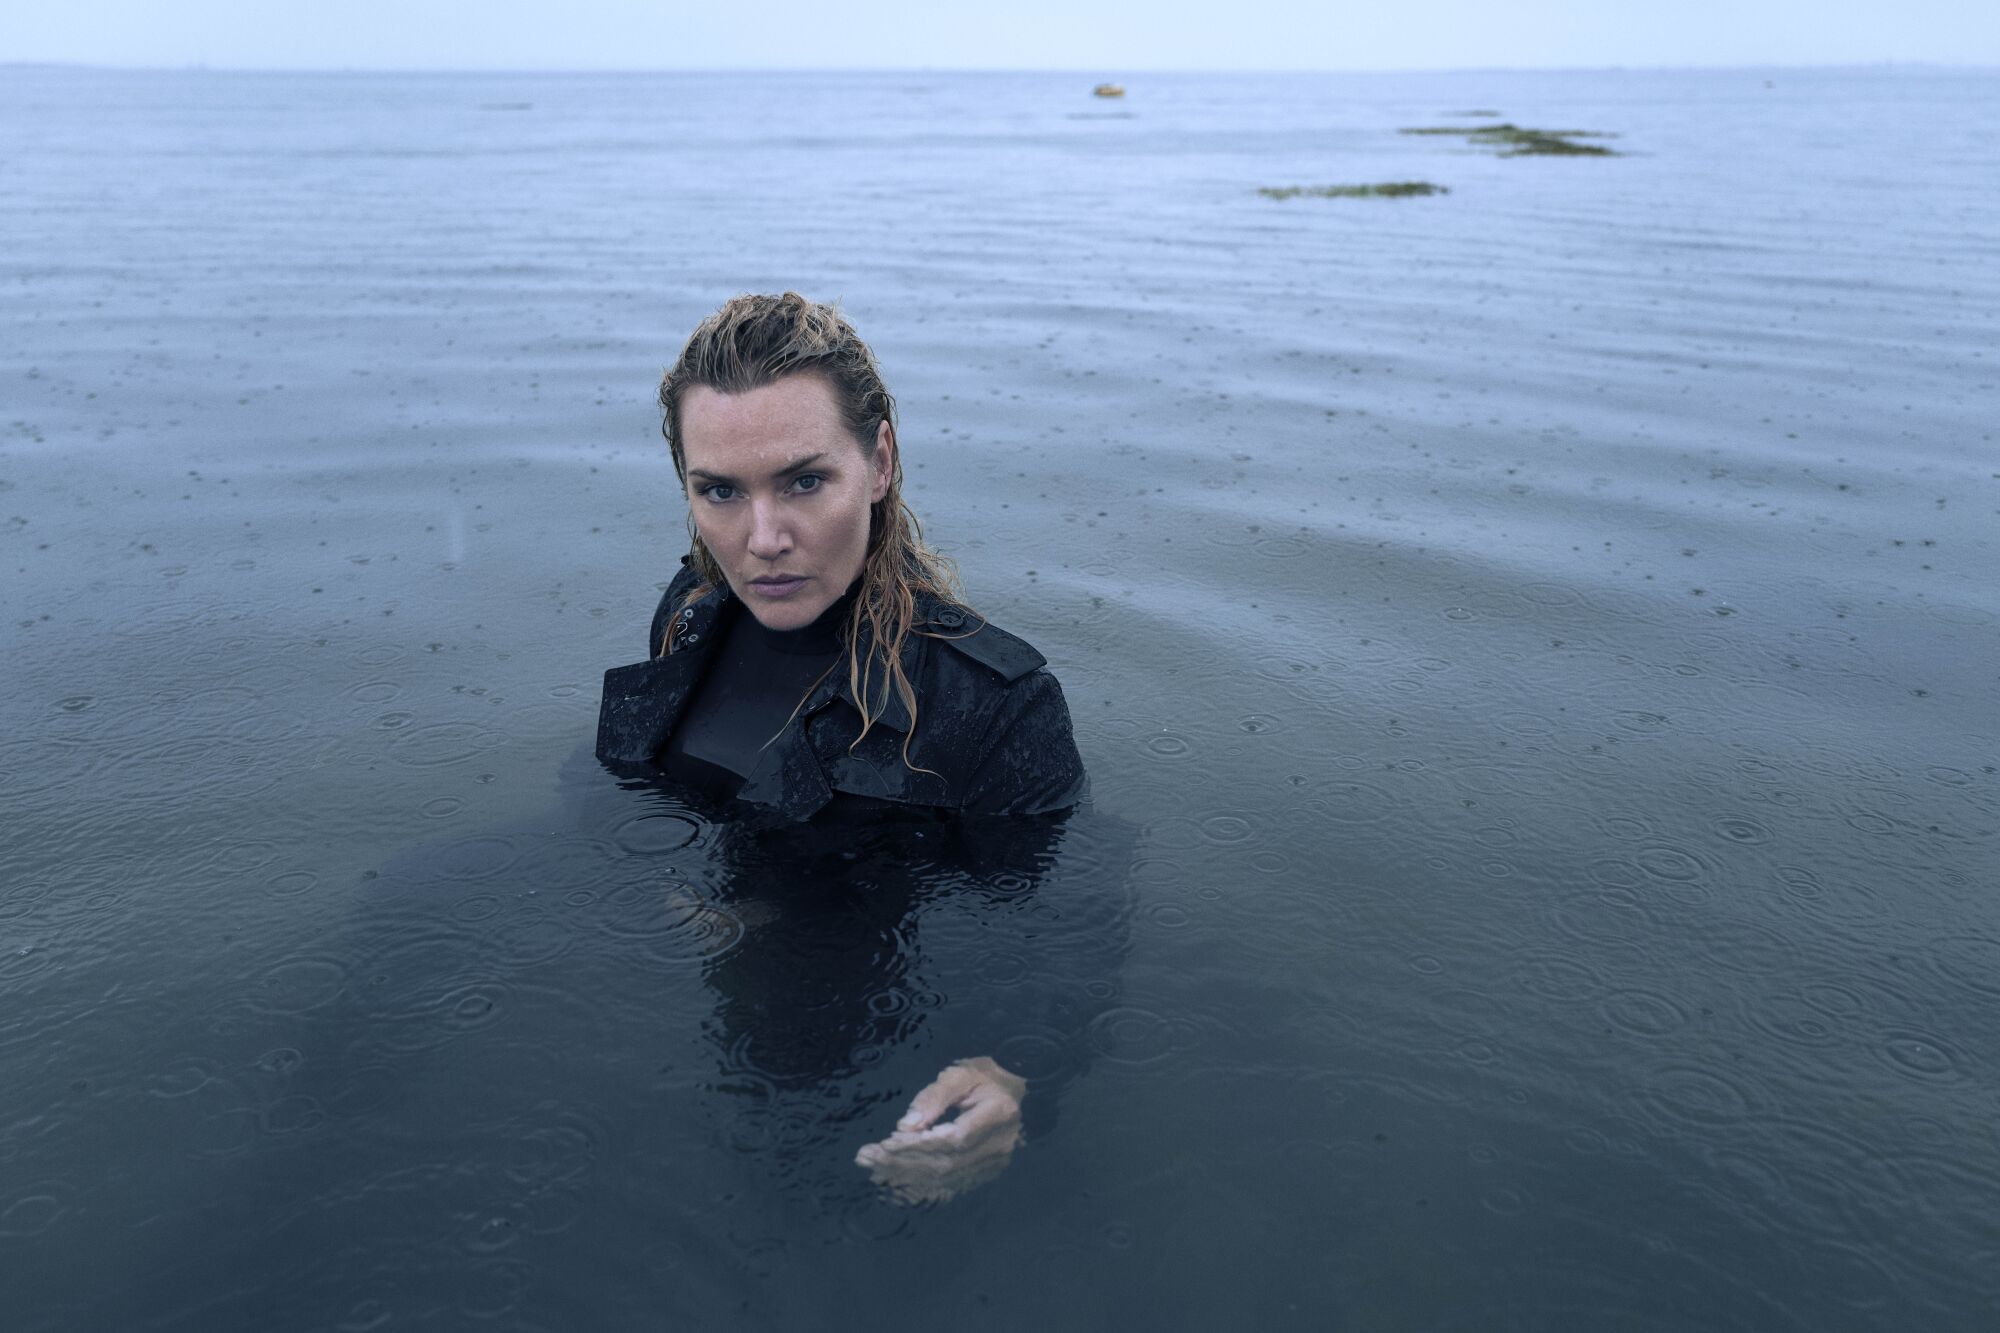 A fully dressed Kate Winslet immerses herself in a body of water in the rain.